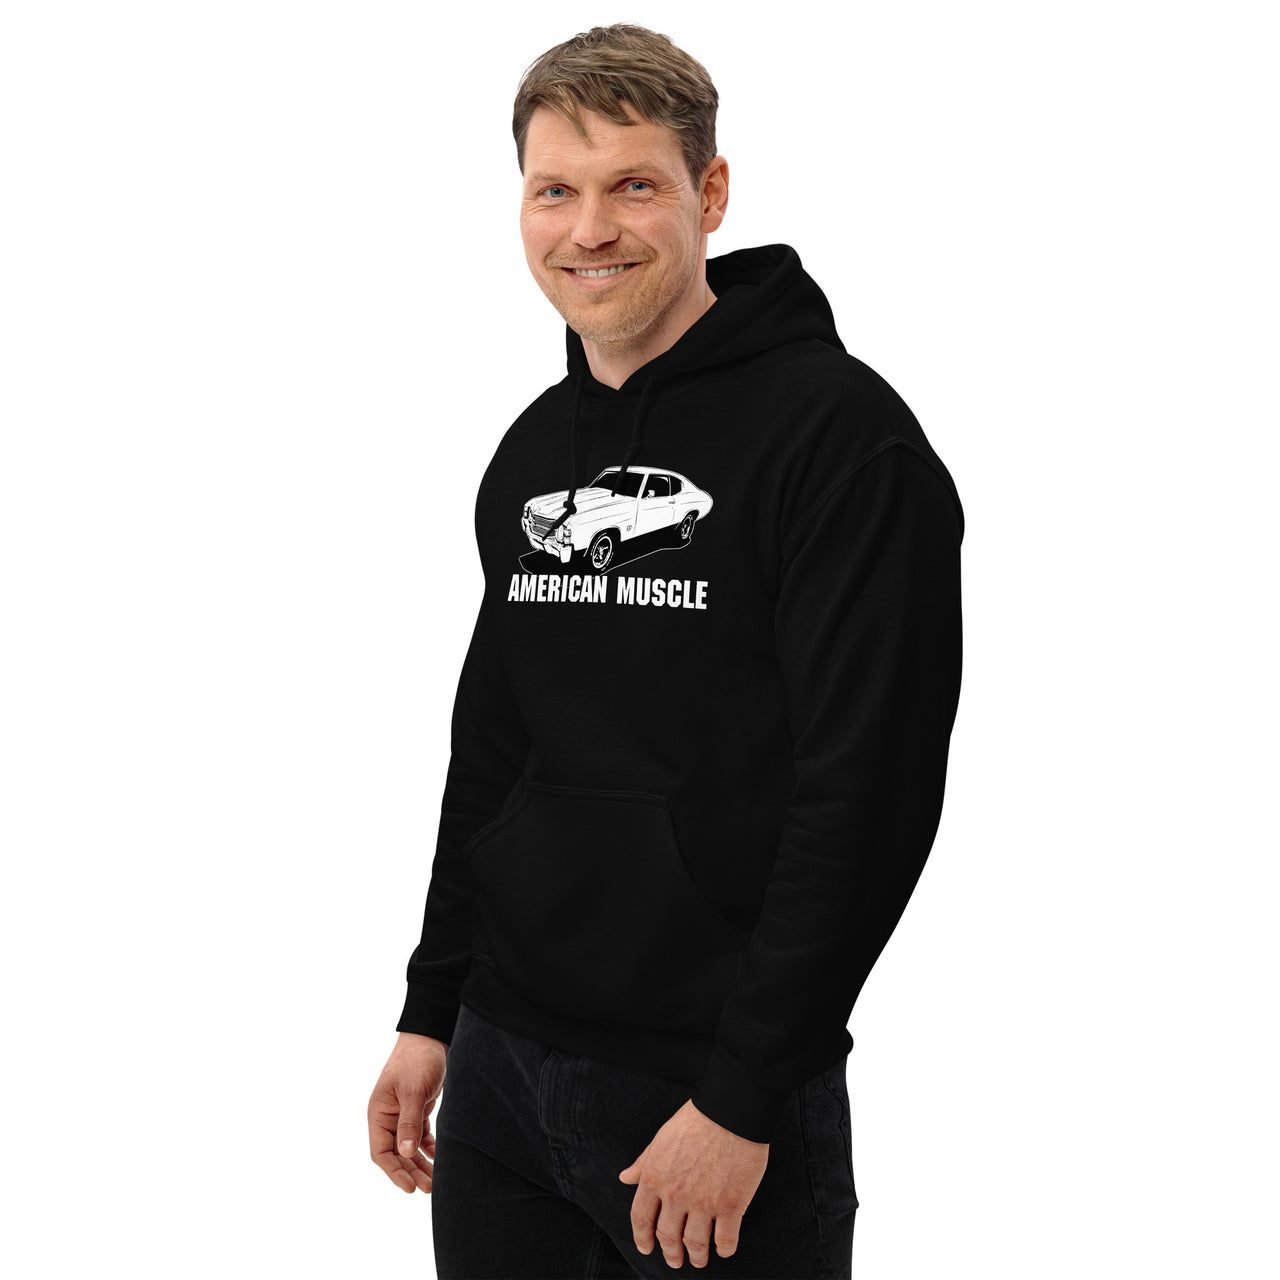 1971 Chevelle Car Hoodie modeled in black